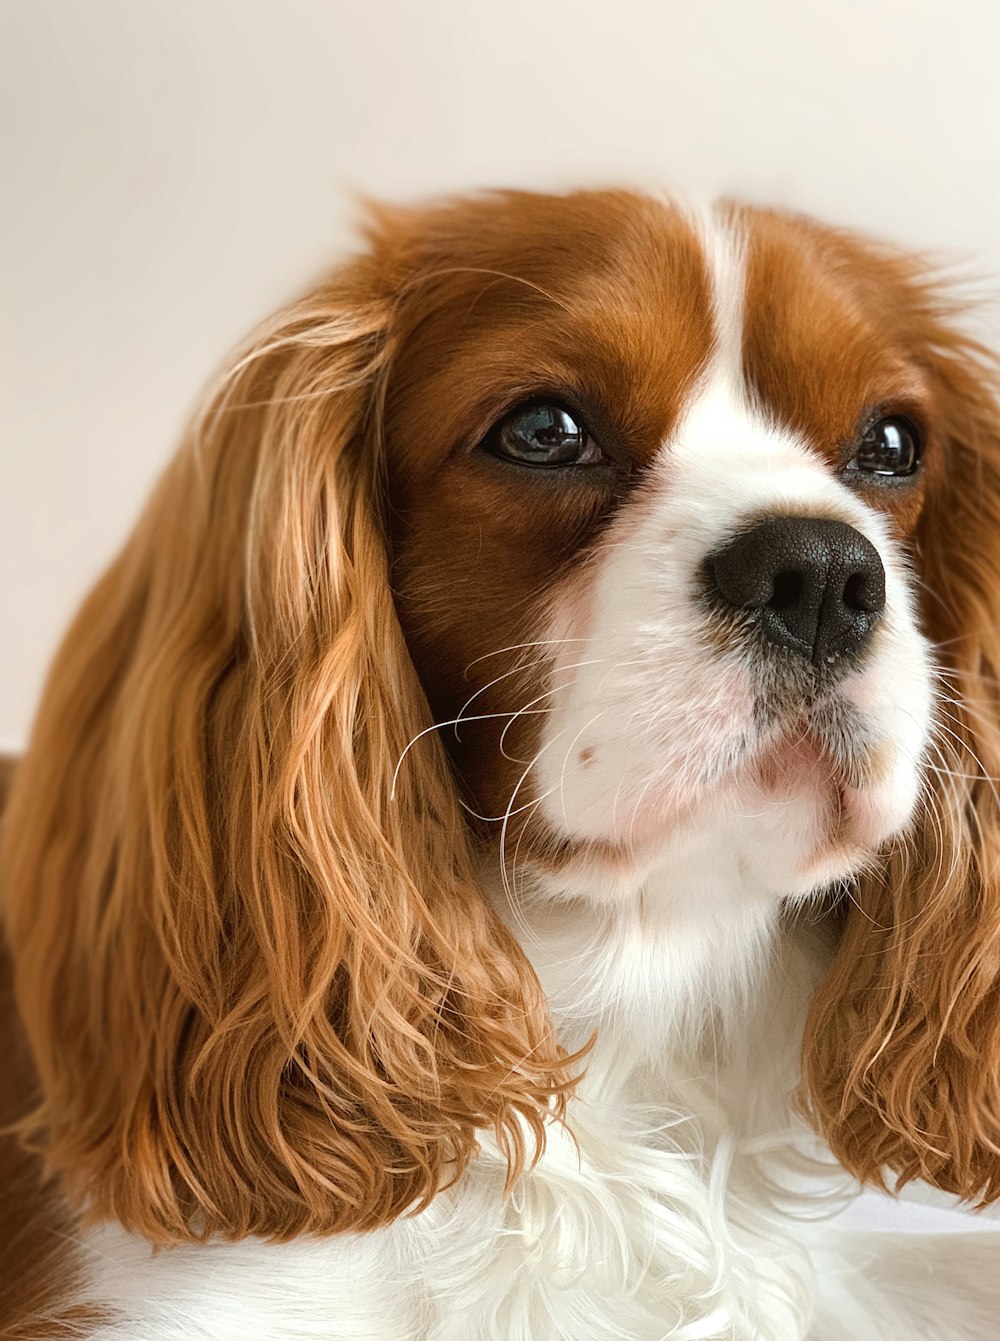 a close up of a dog's face with a white background